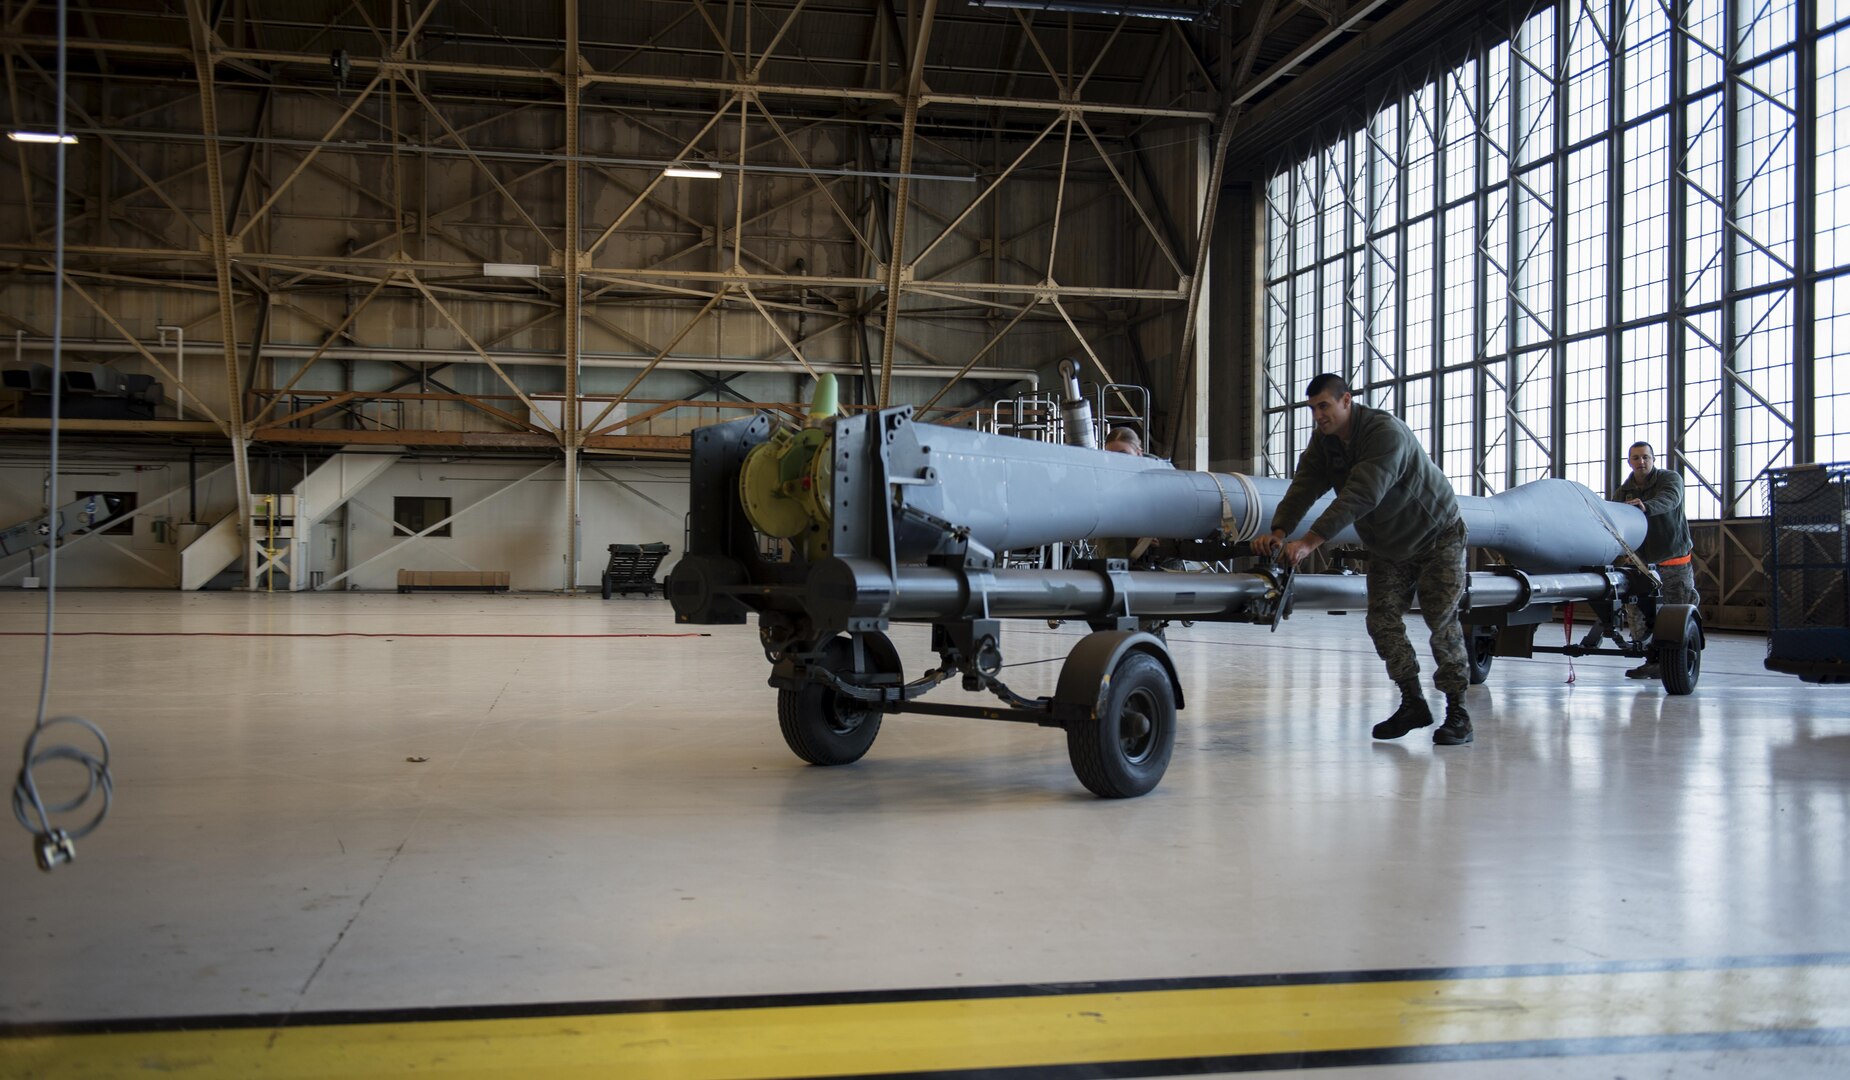 Airmen from the 92nd Maintenance Squadron hydraulics shop move a new boom into position to be attached to a KC-135 Stratotanker Dec. 16, 2016, at Fairchild Air Force Base, Wash. The Airmen submitted a correction form to amend the KC-135 technical orders Airmen reference when repairing aircraft. Their request for change was approved and the Air Force-wide correction will be applied to all future technical order versions. (U.S. Air Force photo/ Airman 1st Class Sean Campbell)